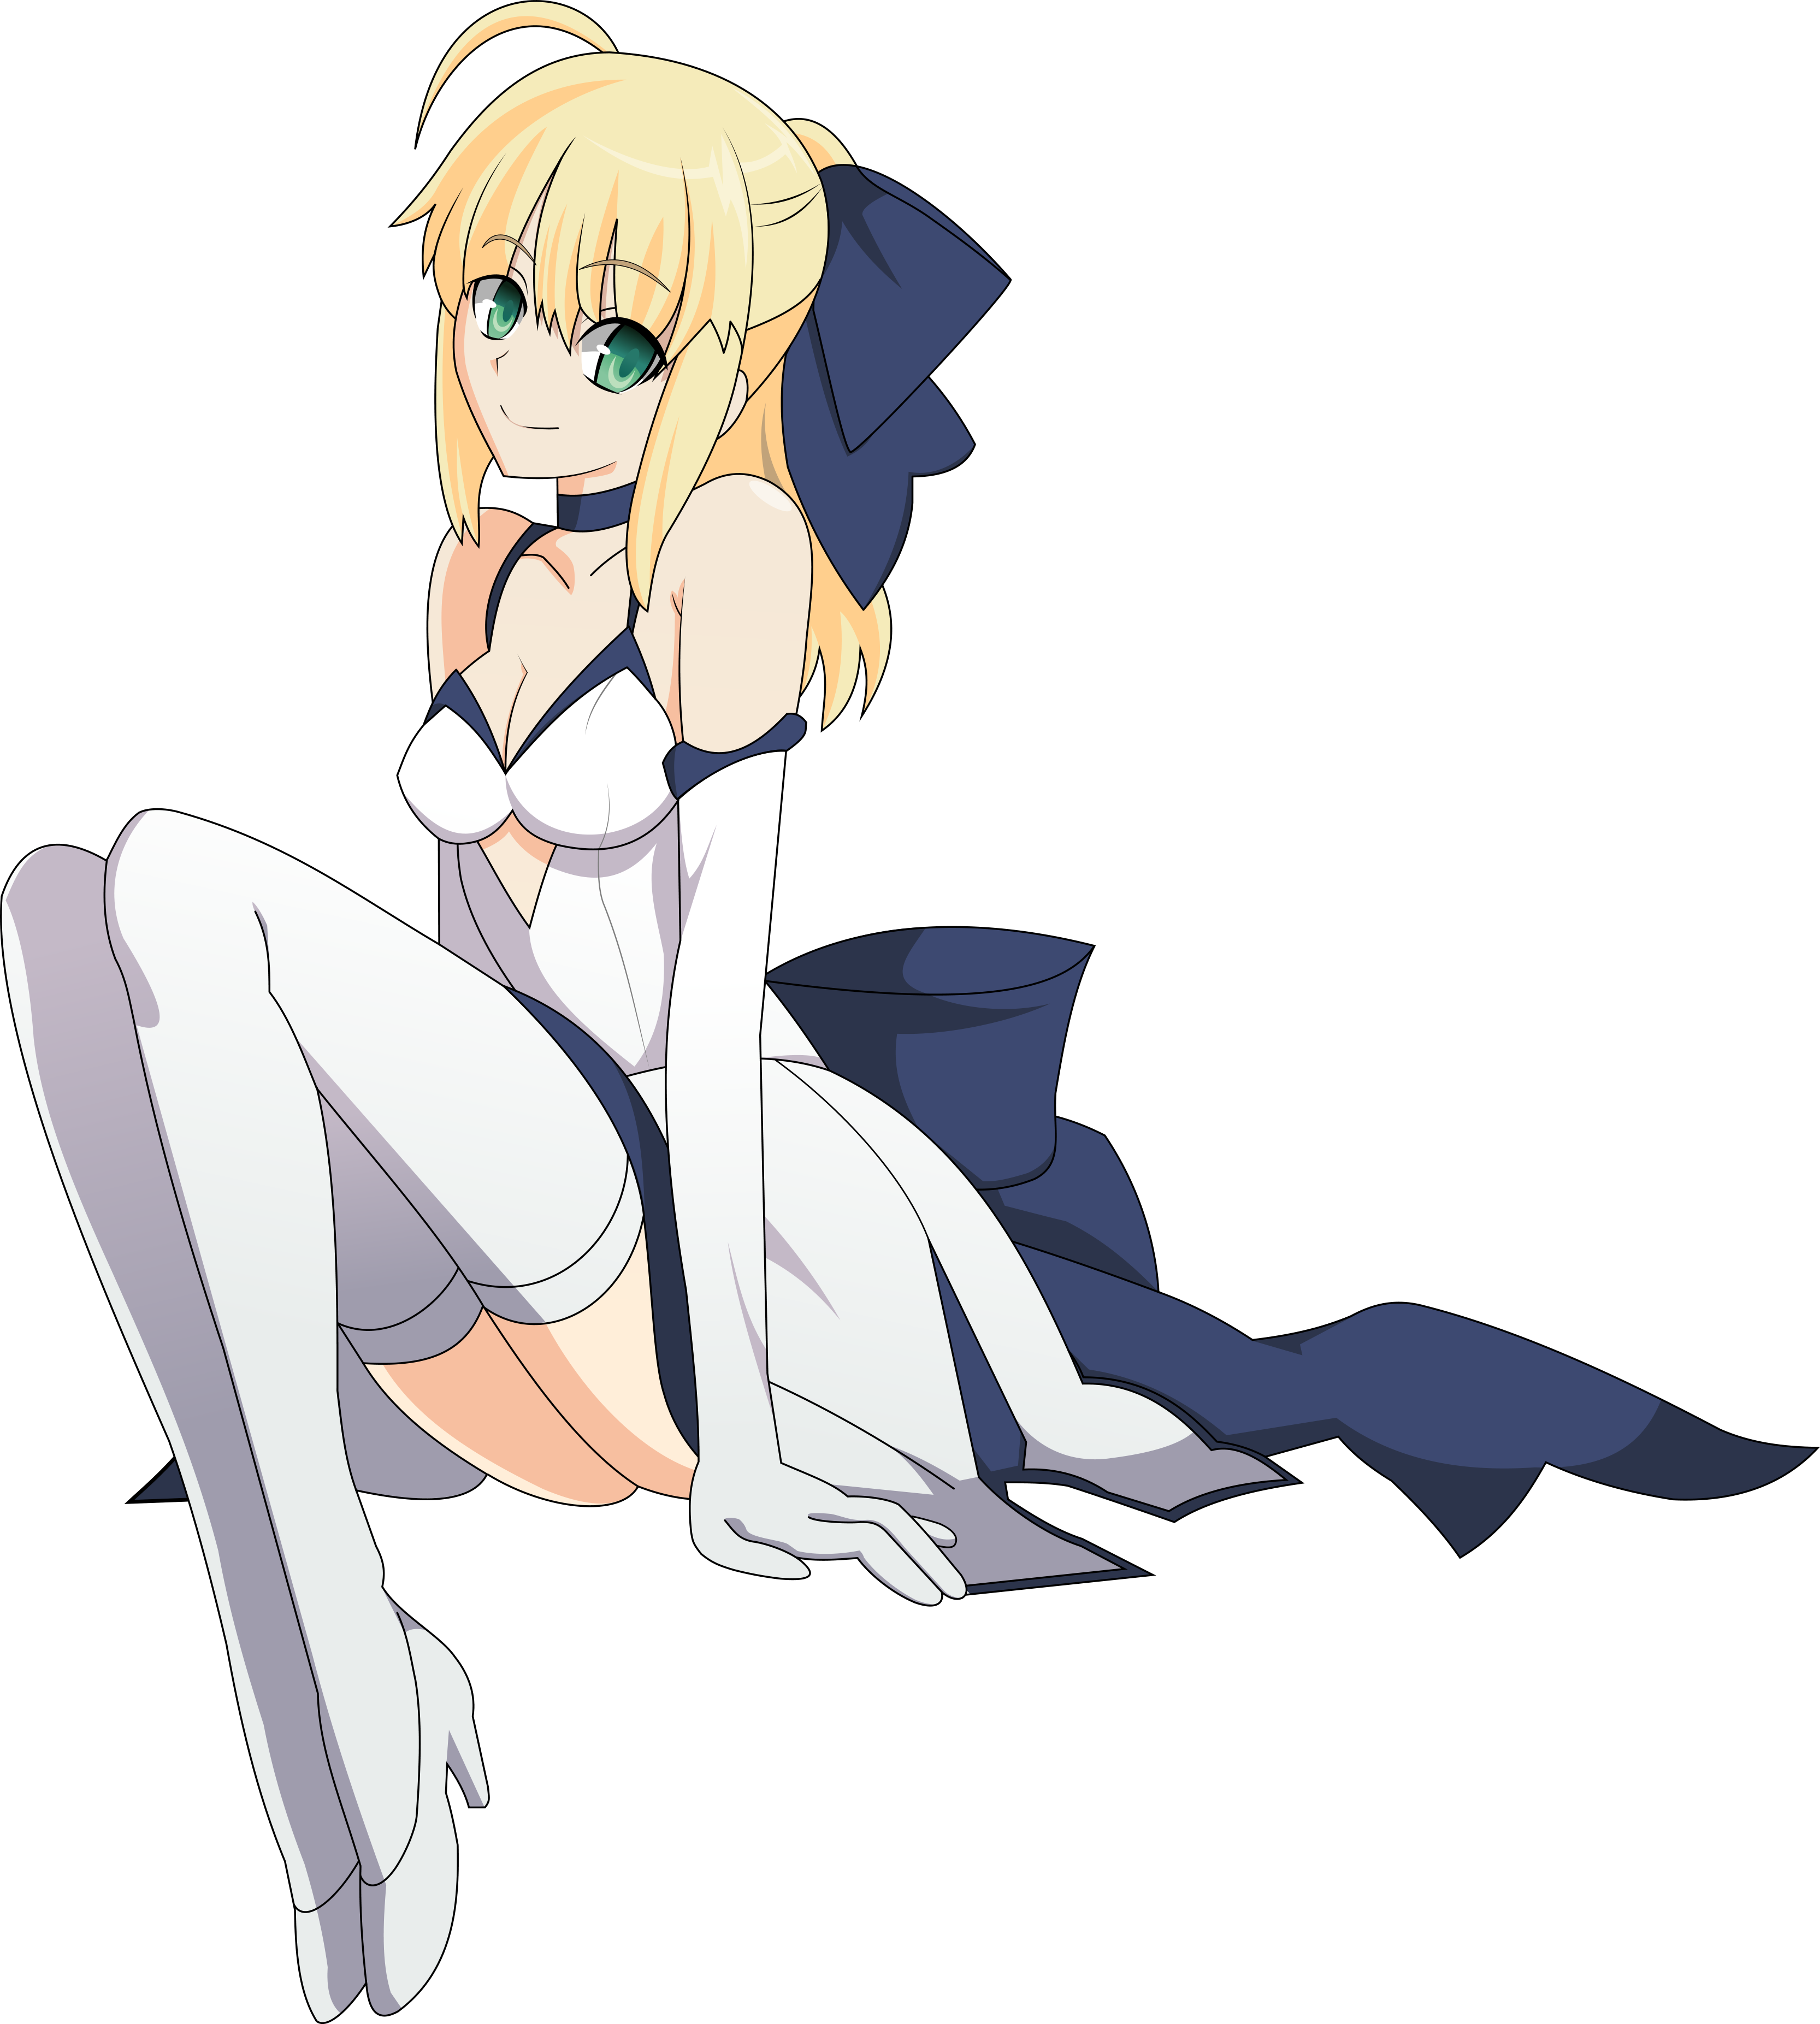 saber-10-years-anniversary-dress-v2.png